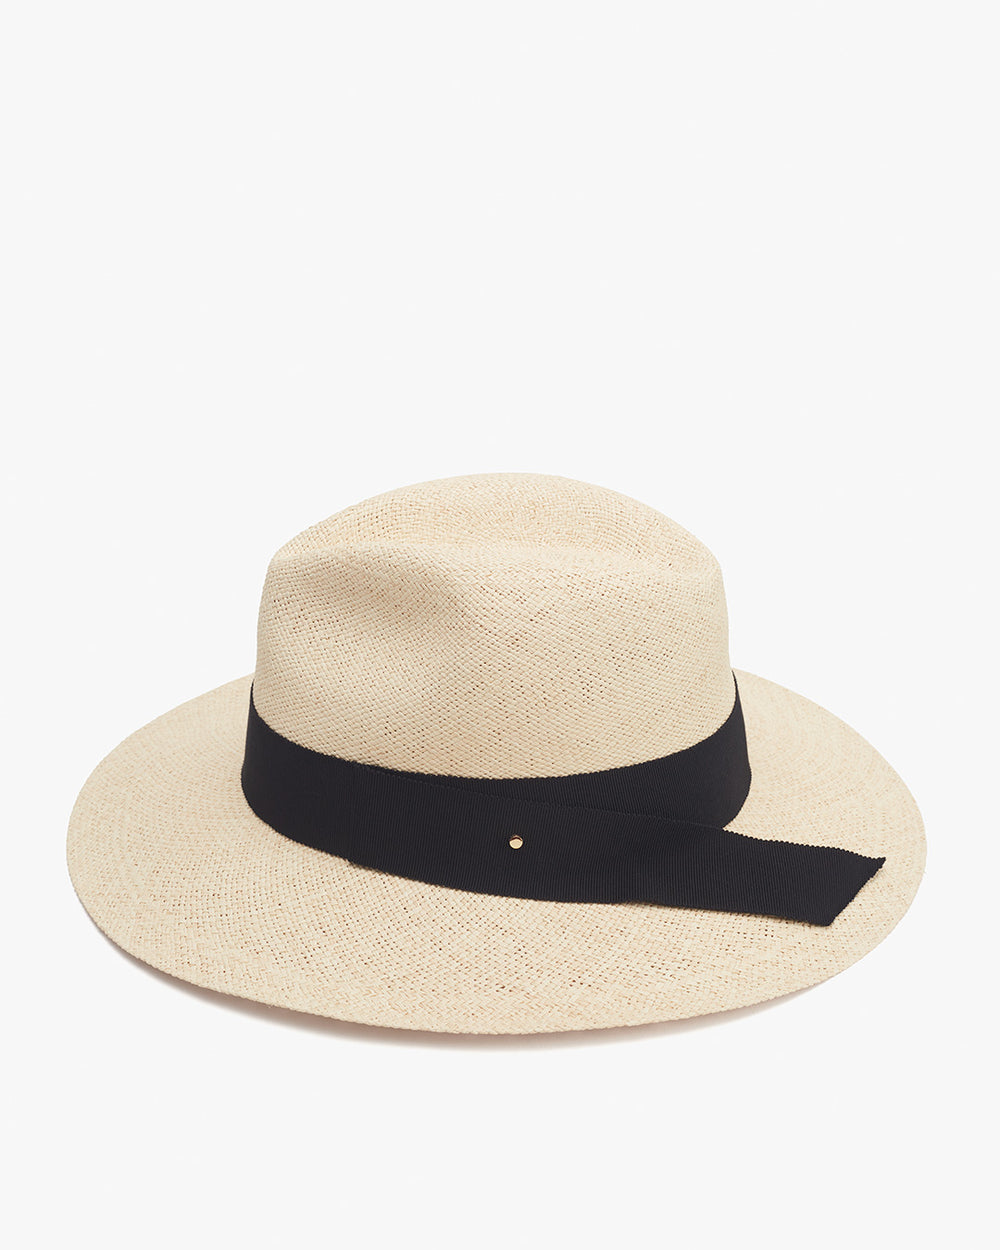 Straw hat with a black ribbon on a plain background.